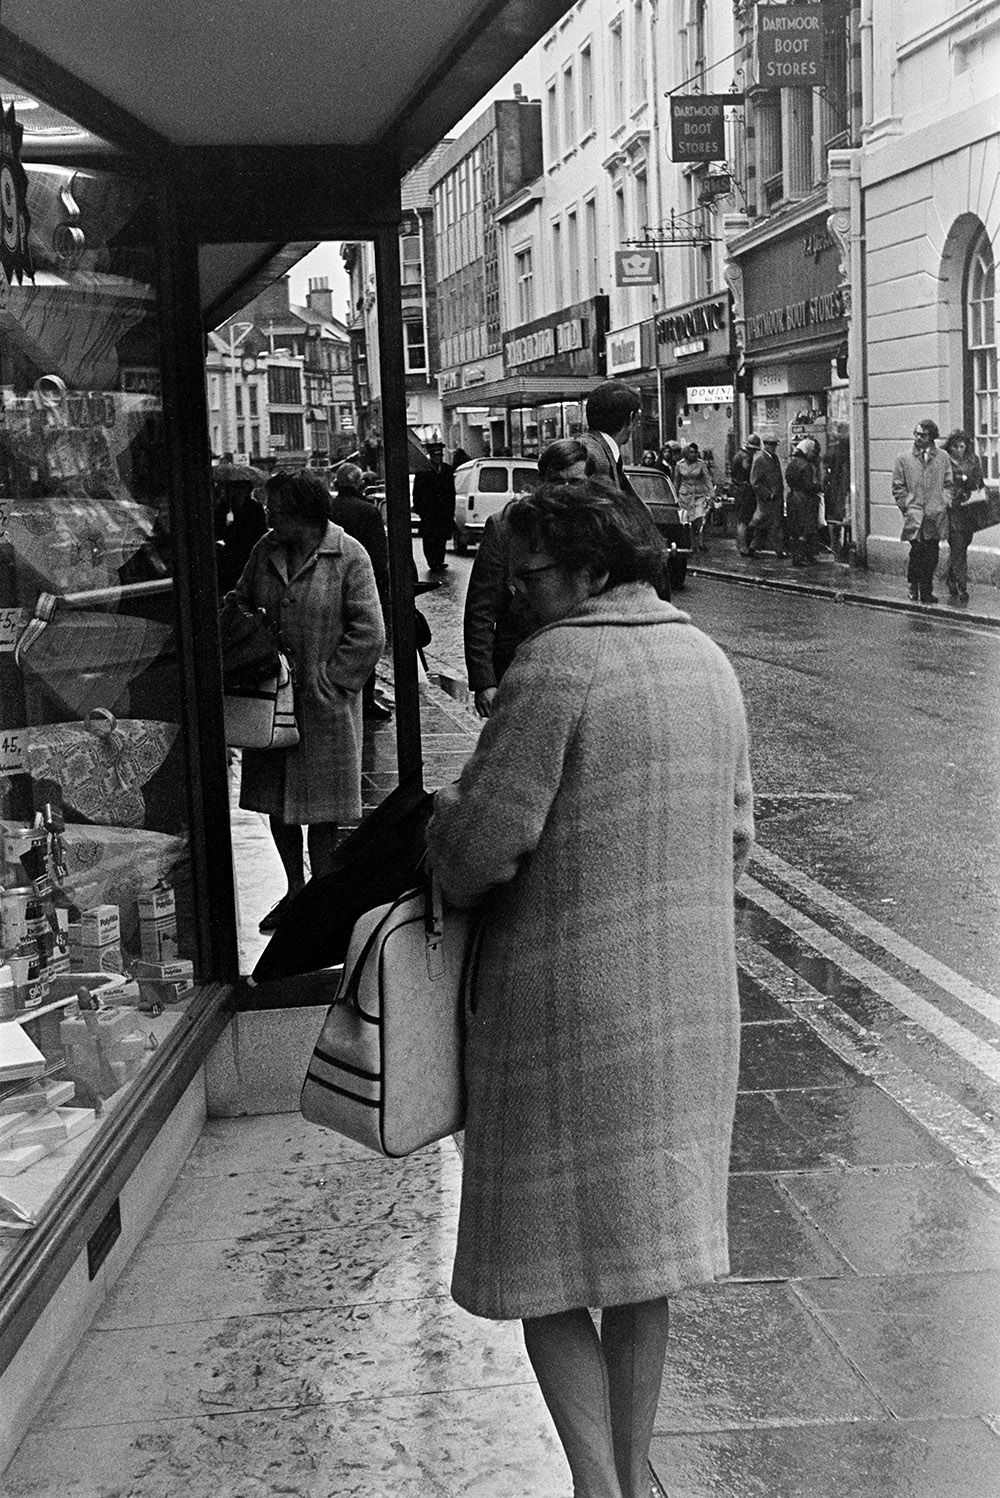 People shopping in Barnstaple High Street. A woman is looking in a shop front window with a mirror in the foreground.